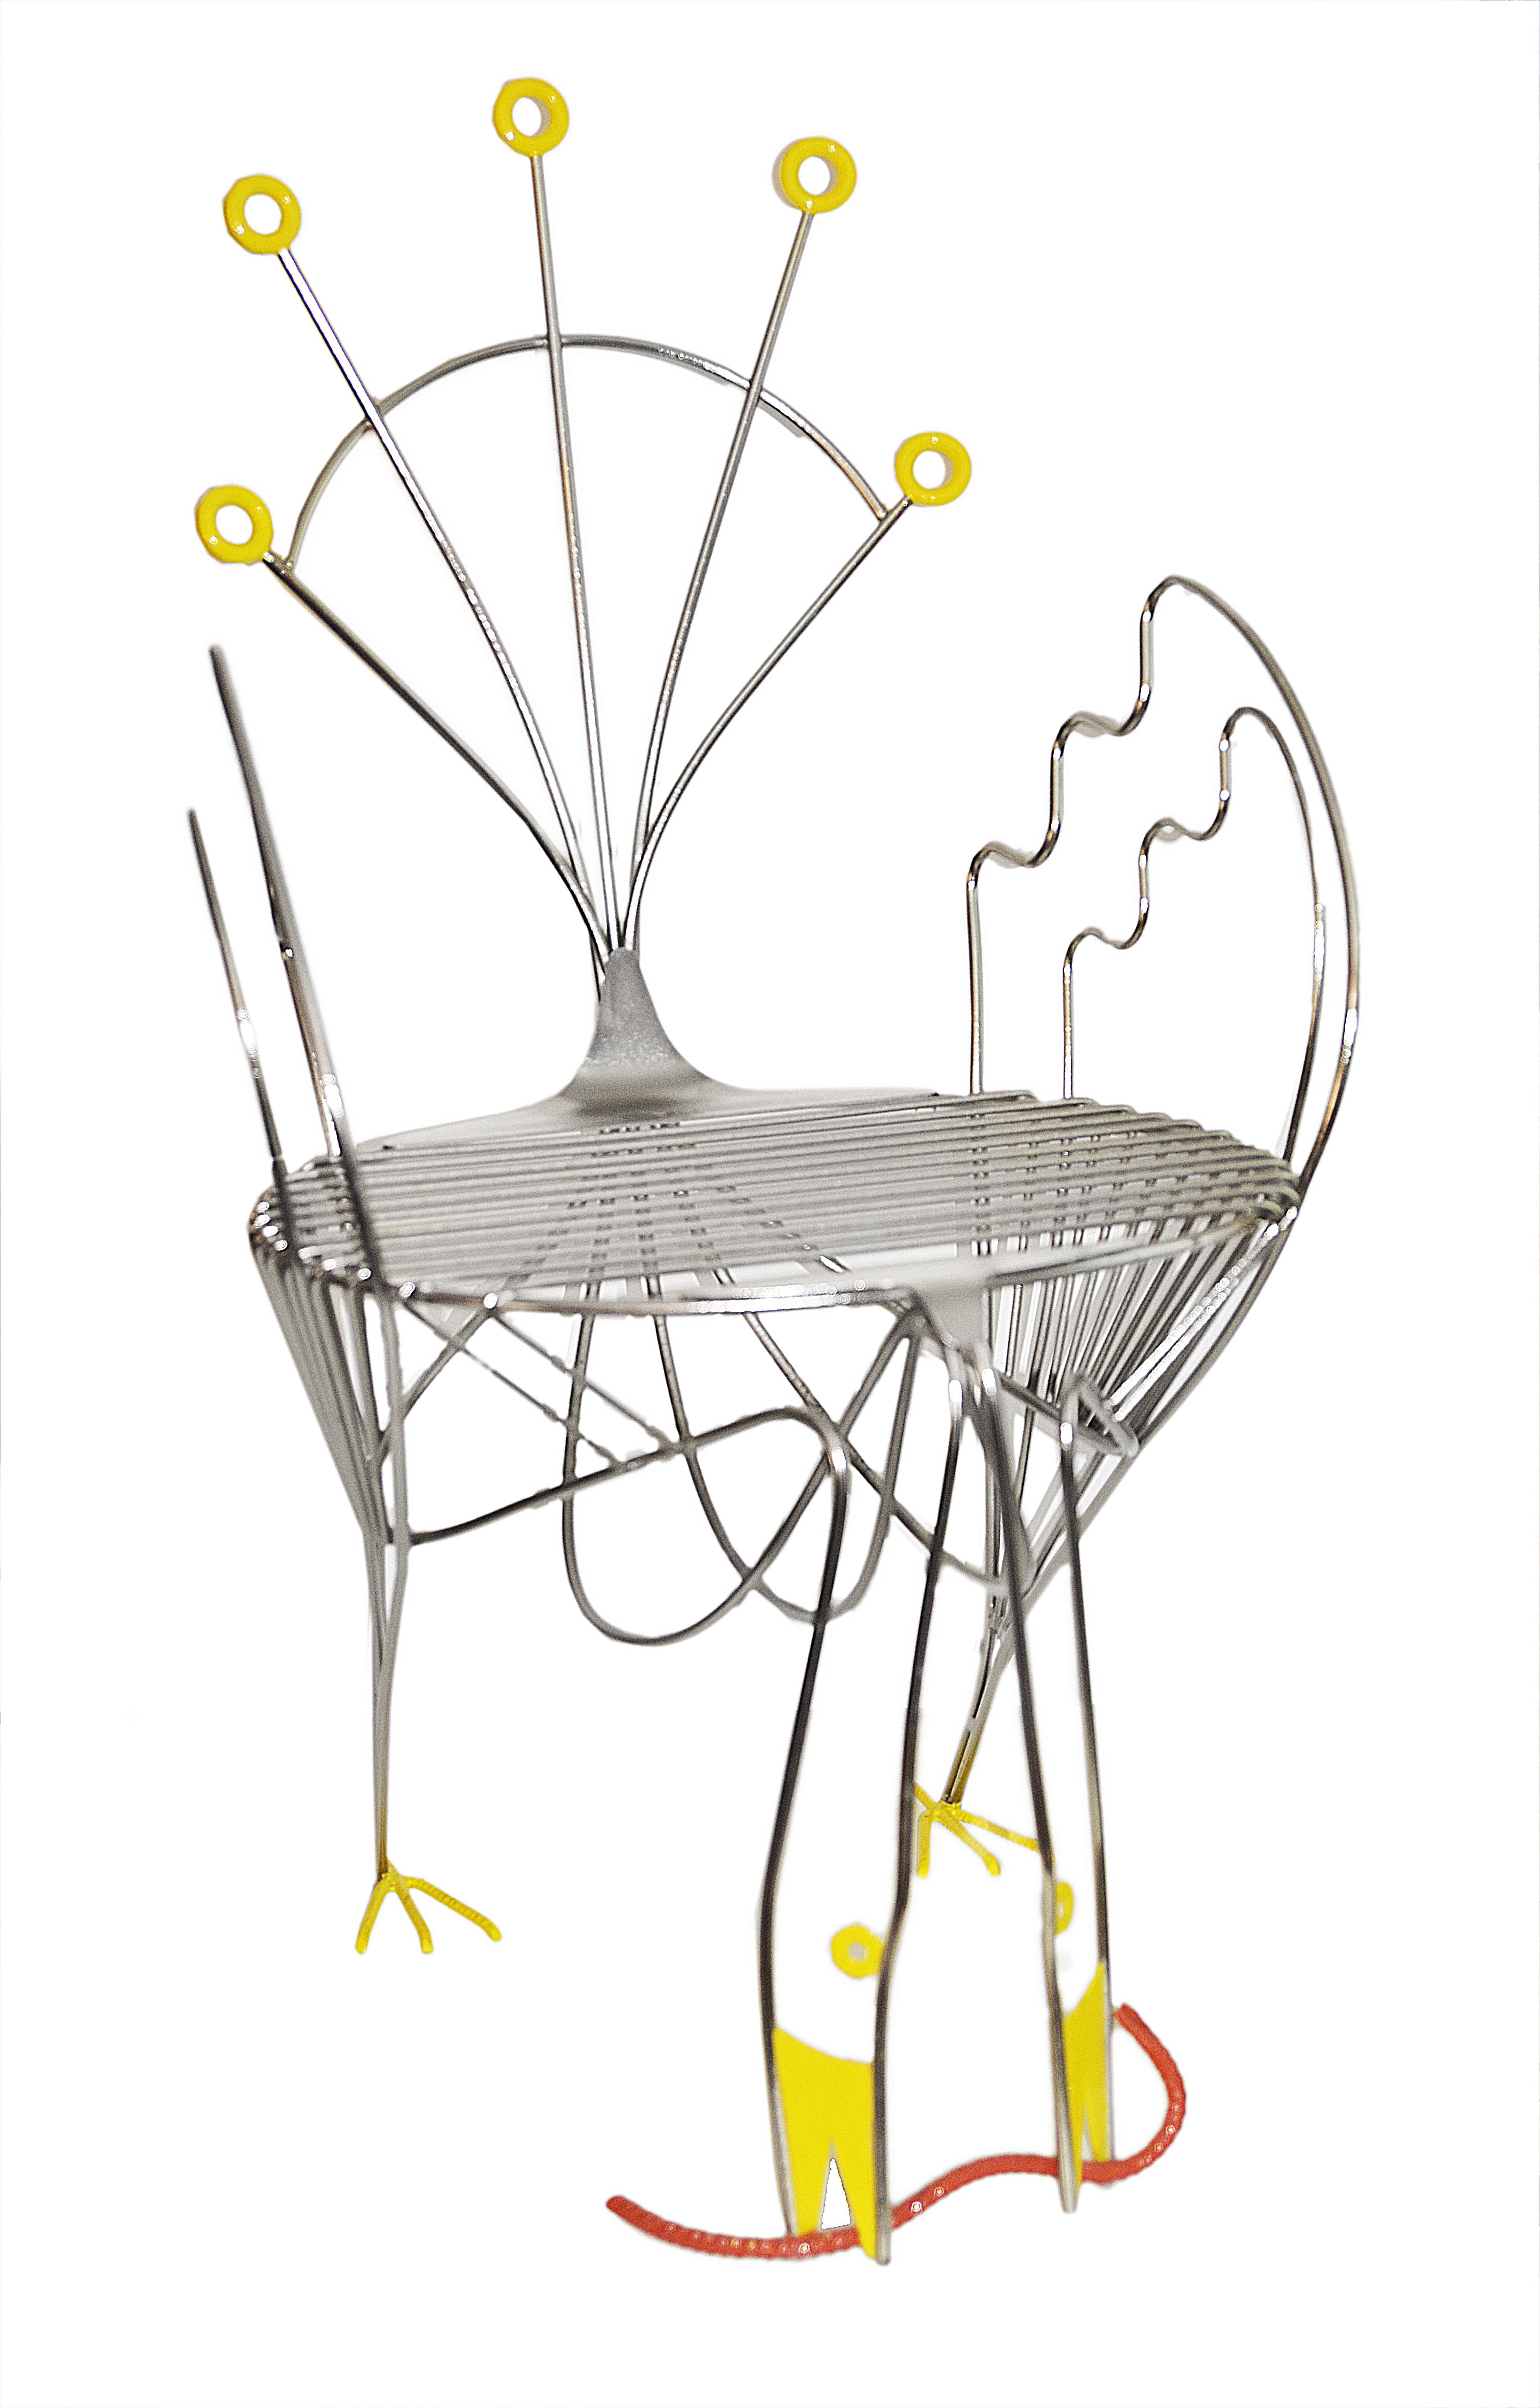 Riccardo Dalisi
'Pavone'
1986
the chair of nickel plated and steel frame construction, with yellow